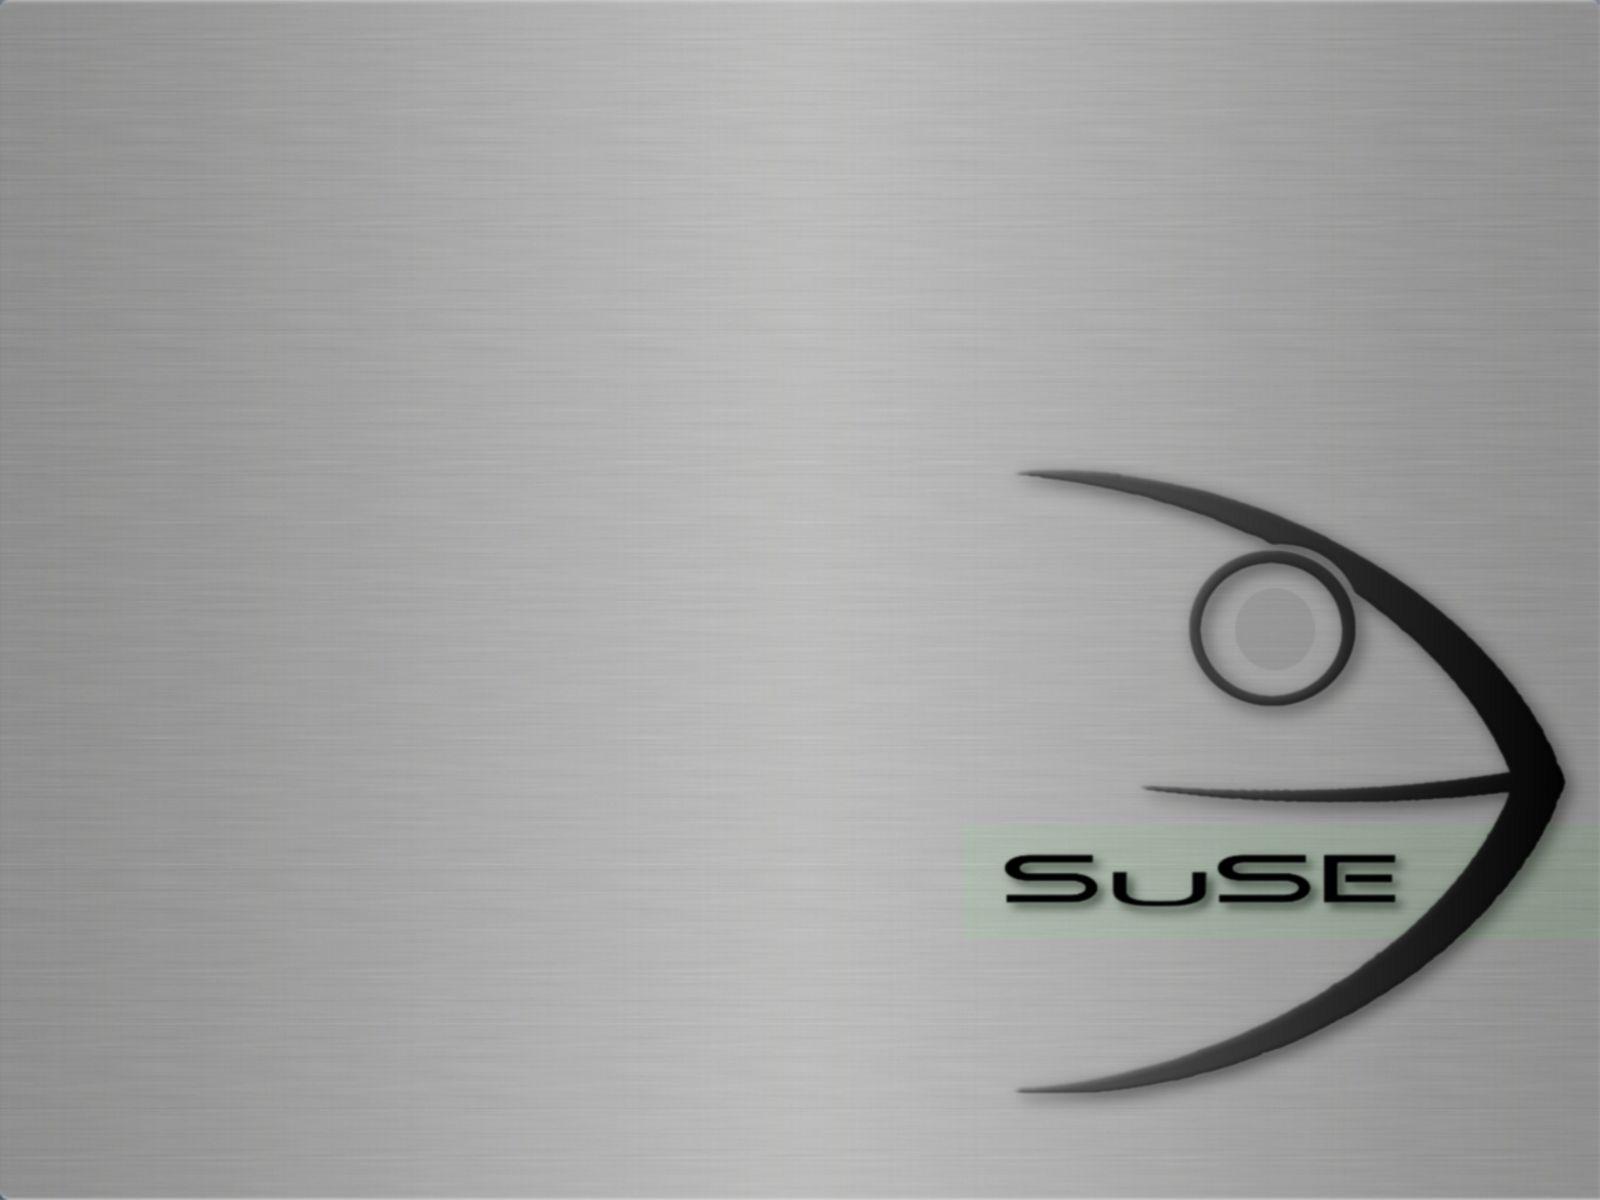 Brand And Logo Suse HD Wallpaper